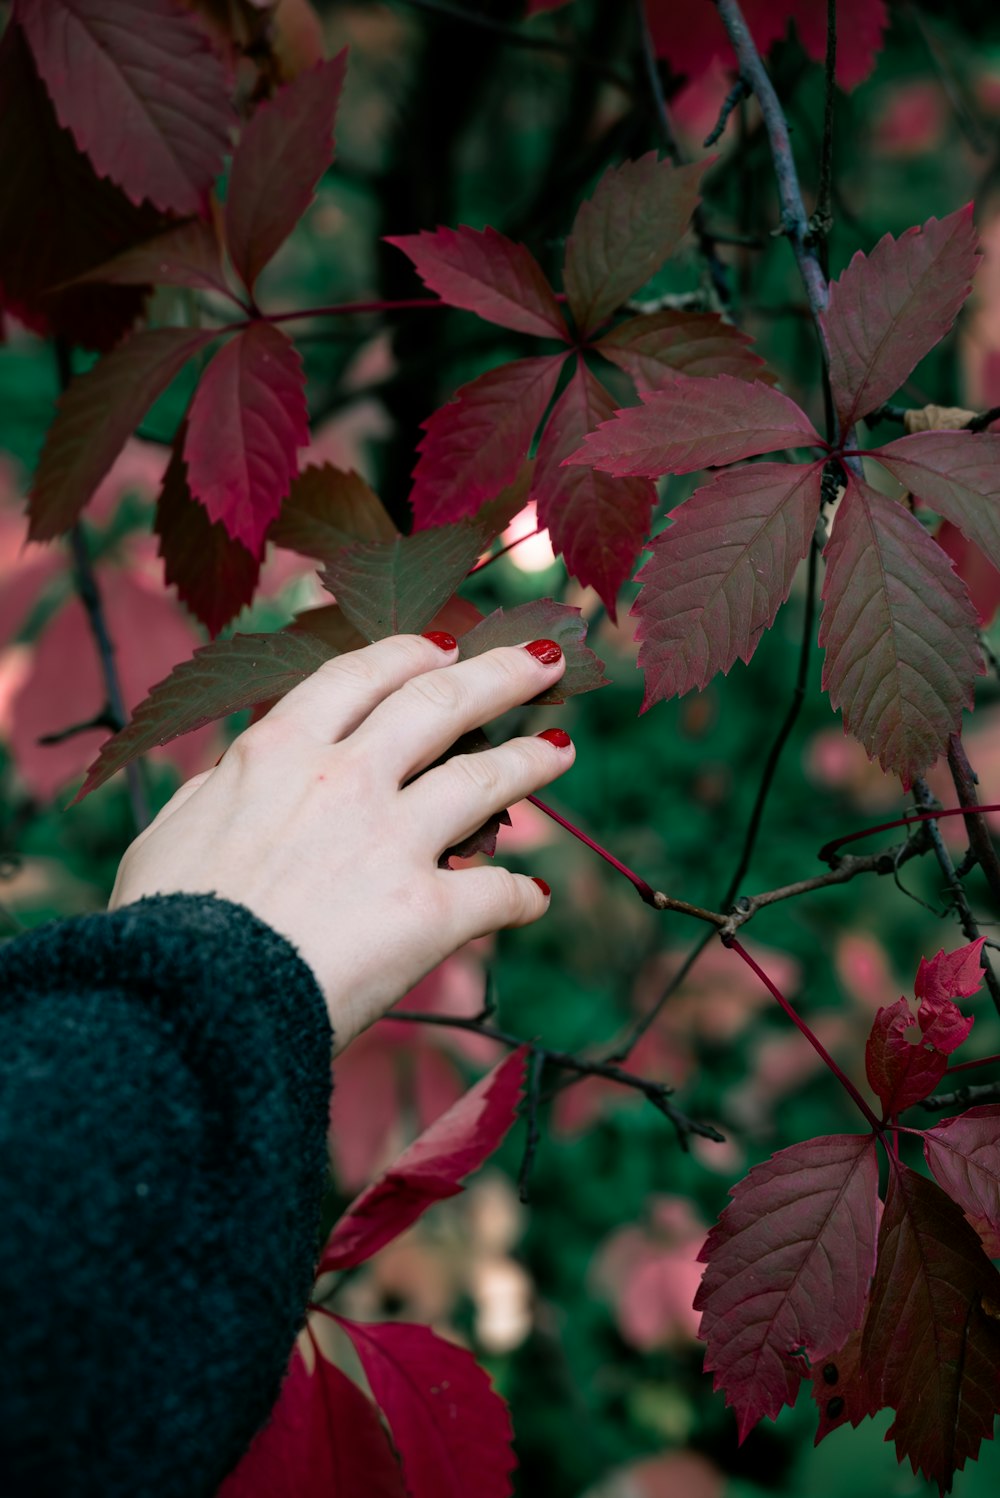 a person's hand reaching for a leaf on a tree